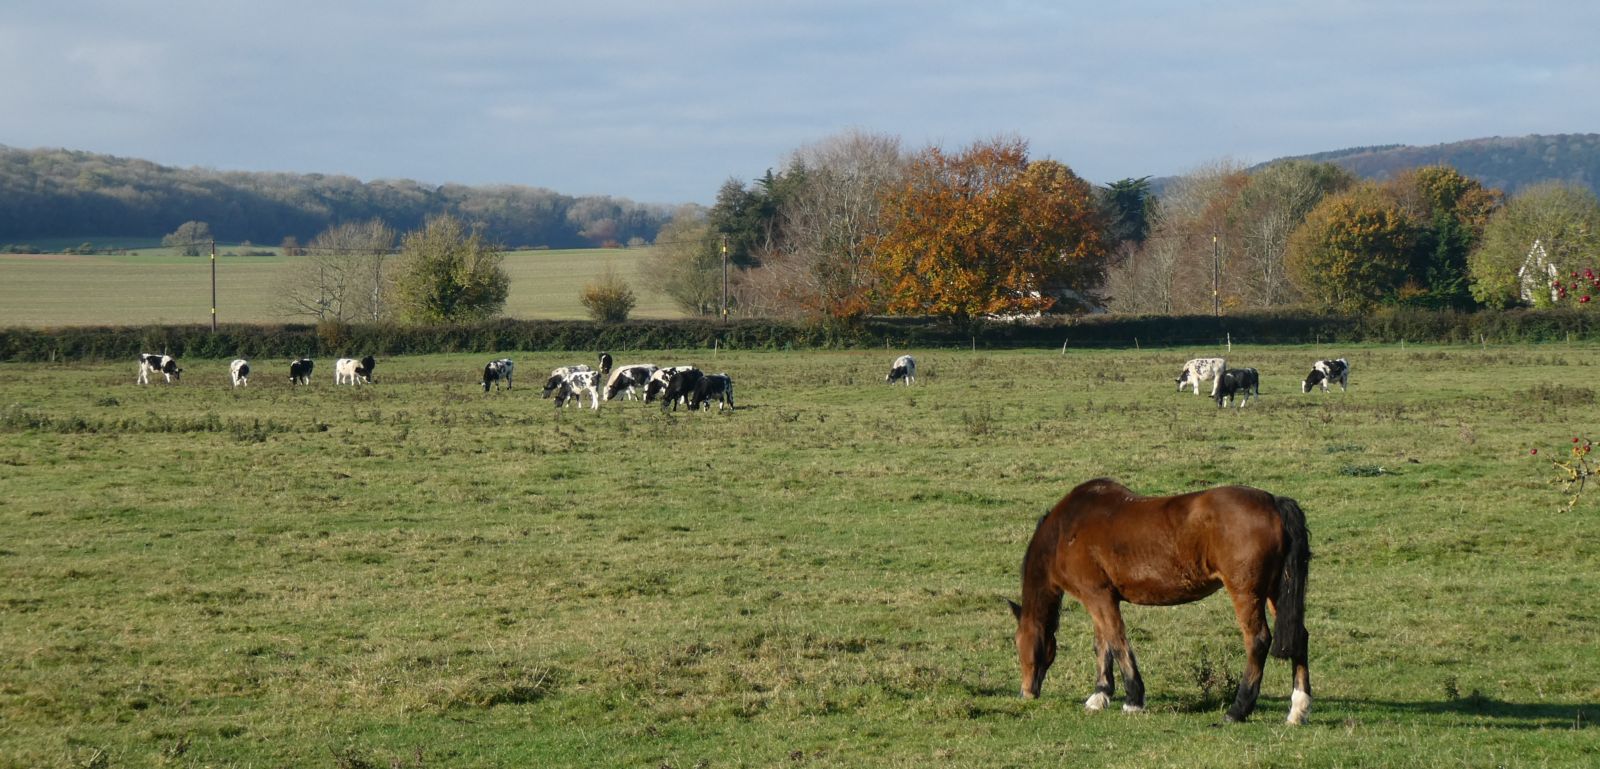 Horse and cows in field